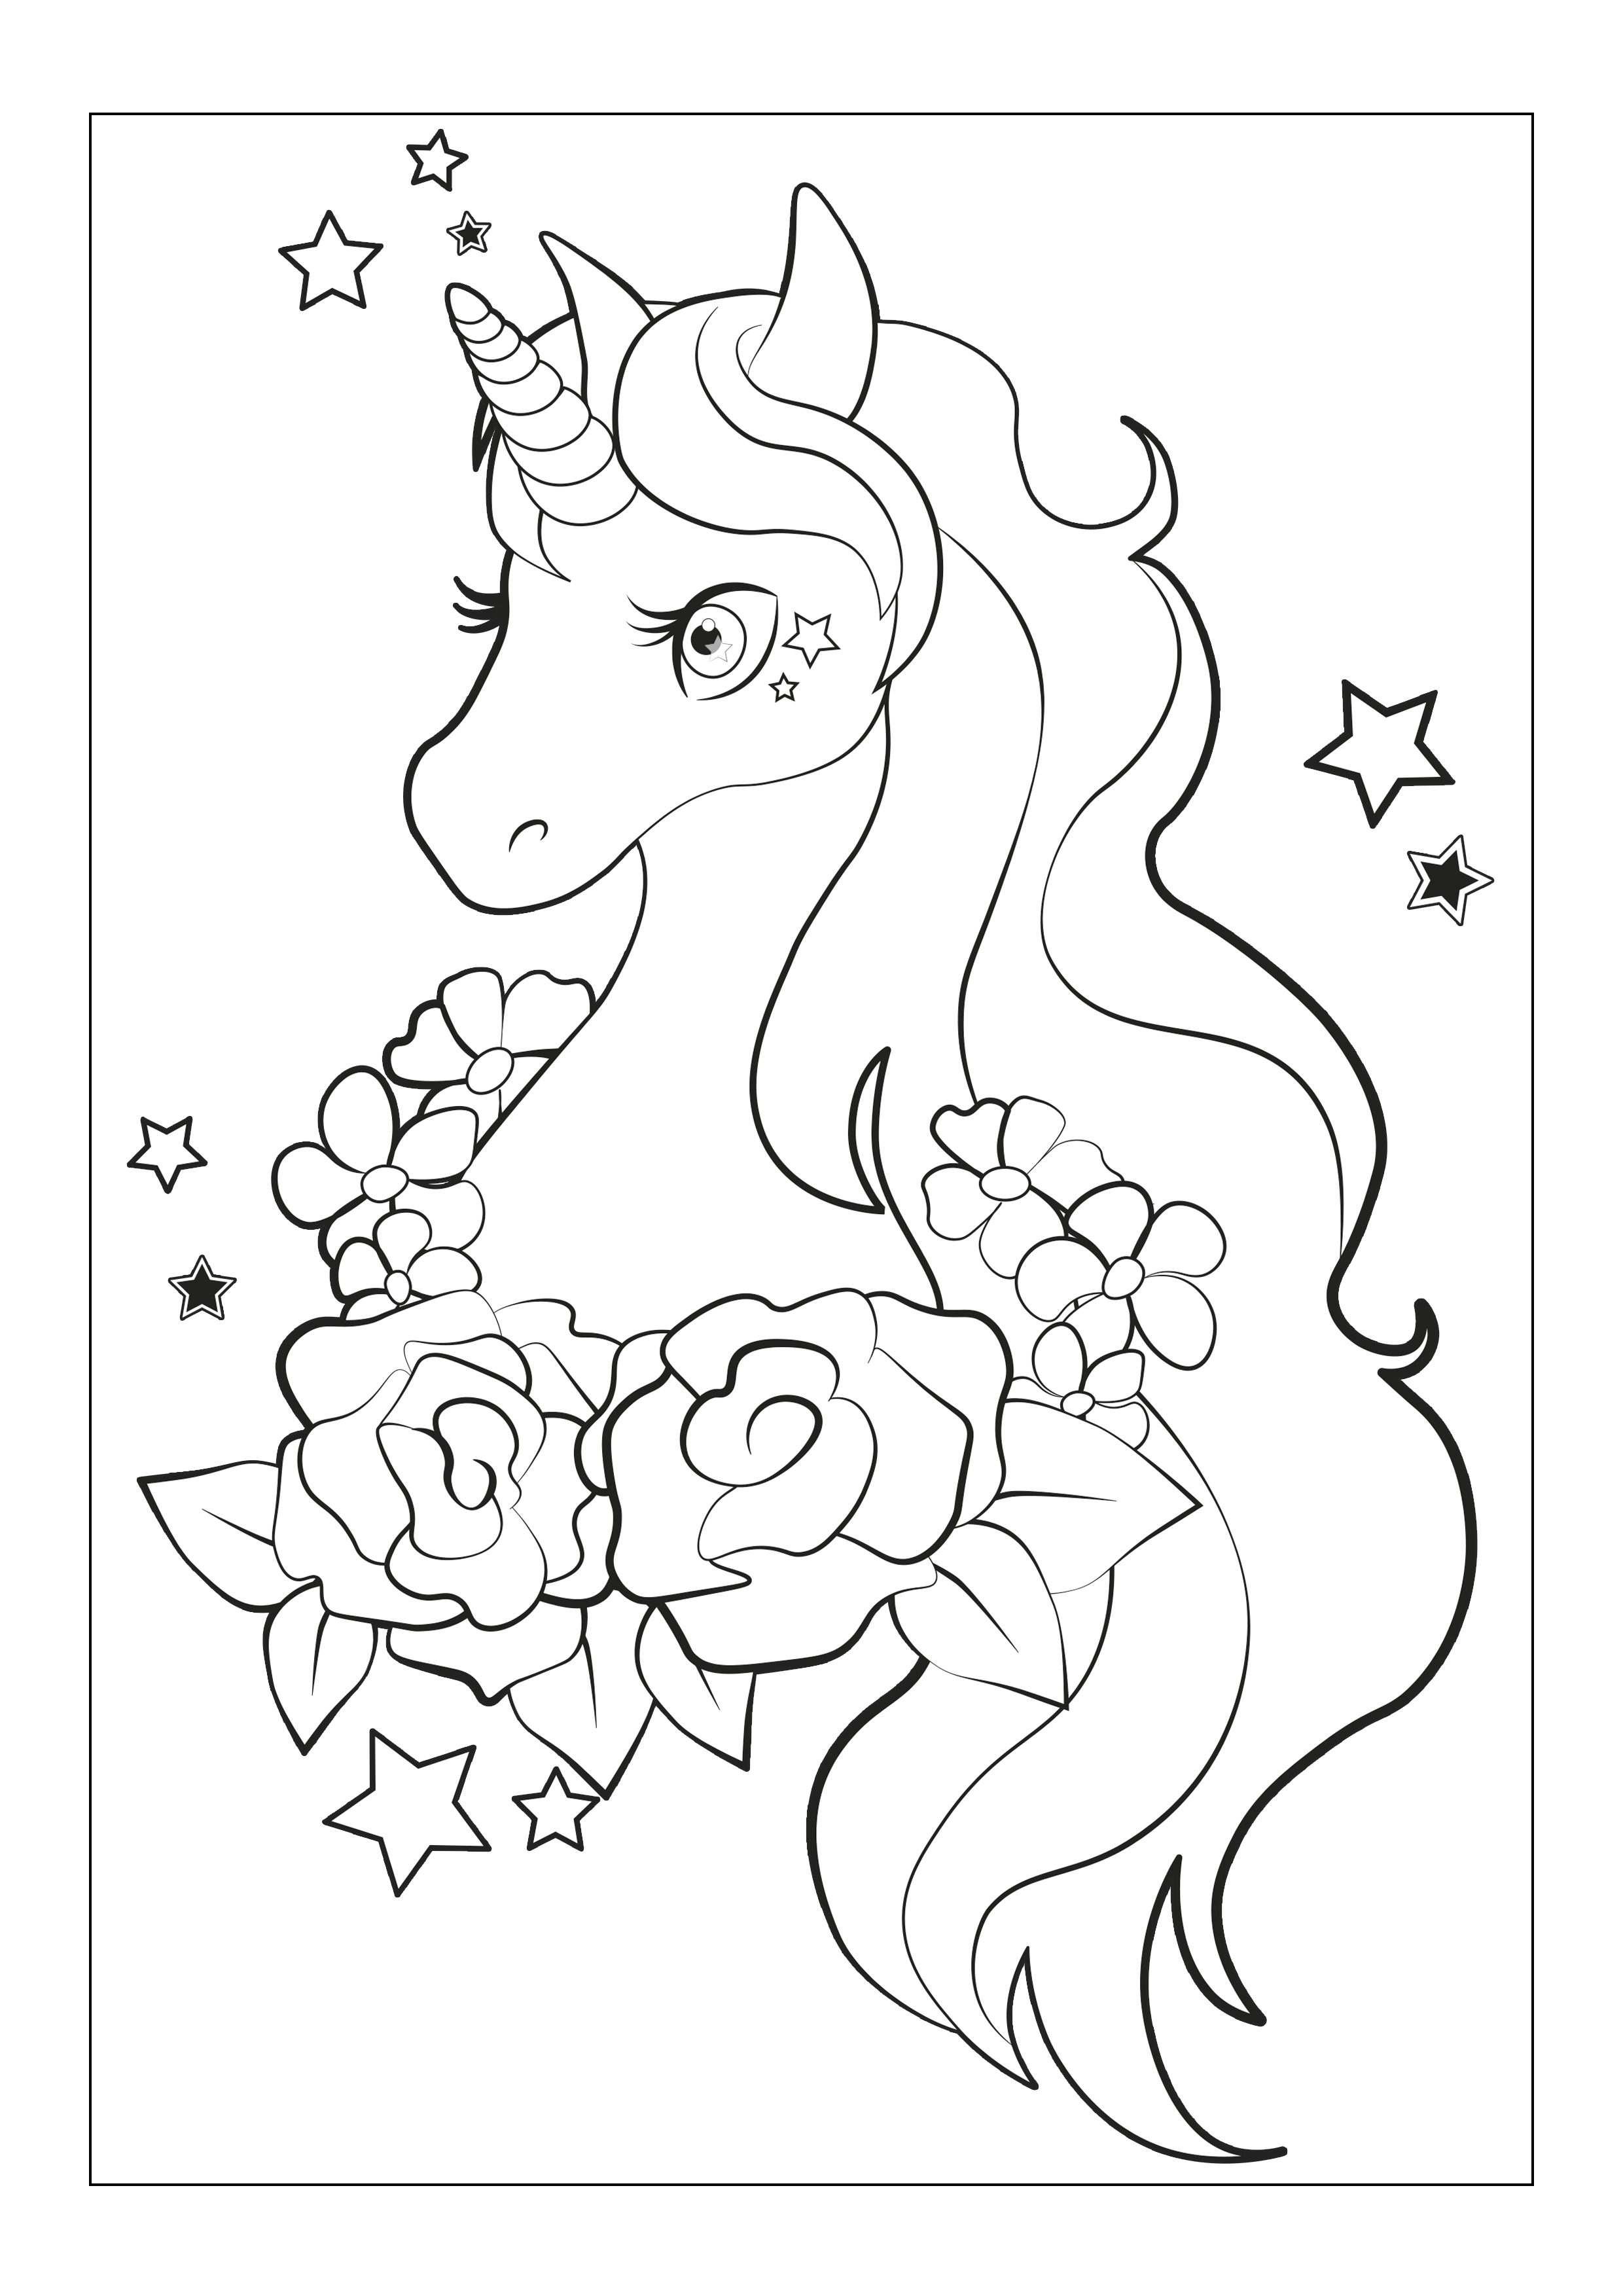 https://www.youloveit.com/uploads/posts/2019-09/1567958325_youloveit_com_unicorn_coloring_pages16.png